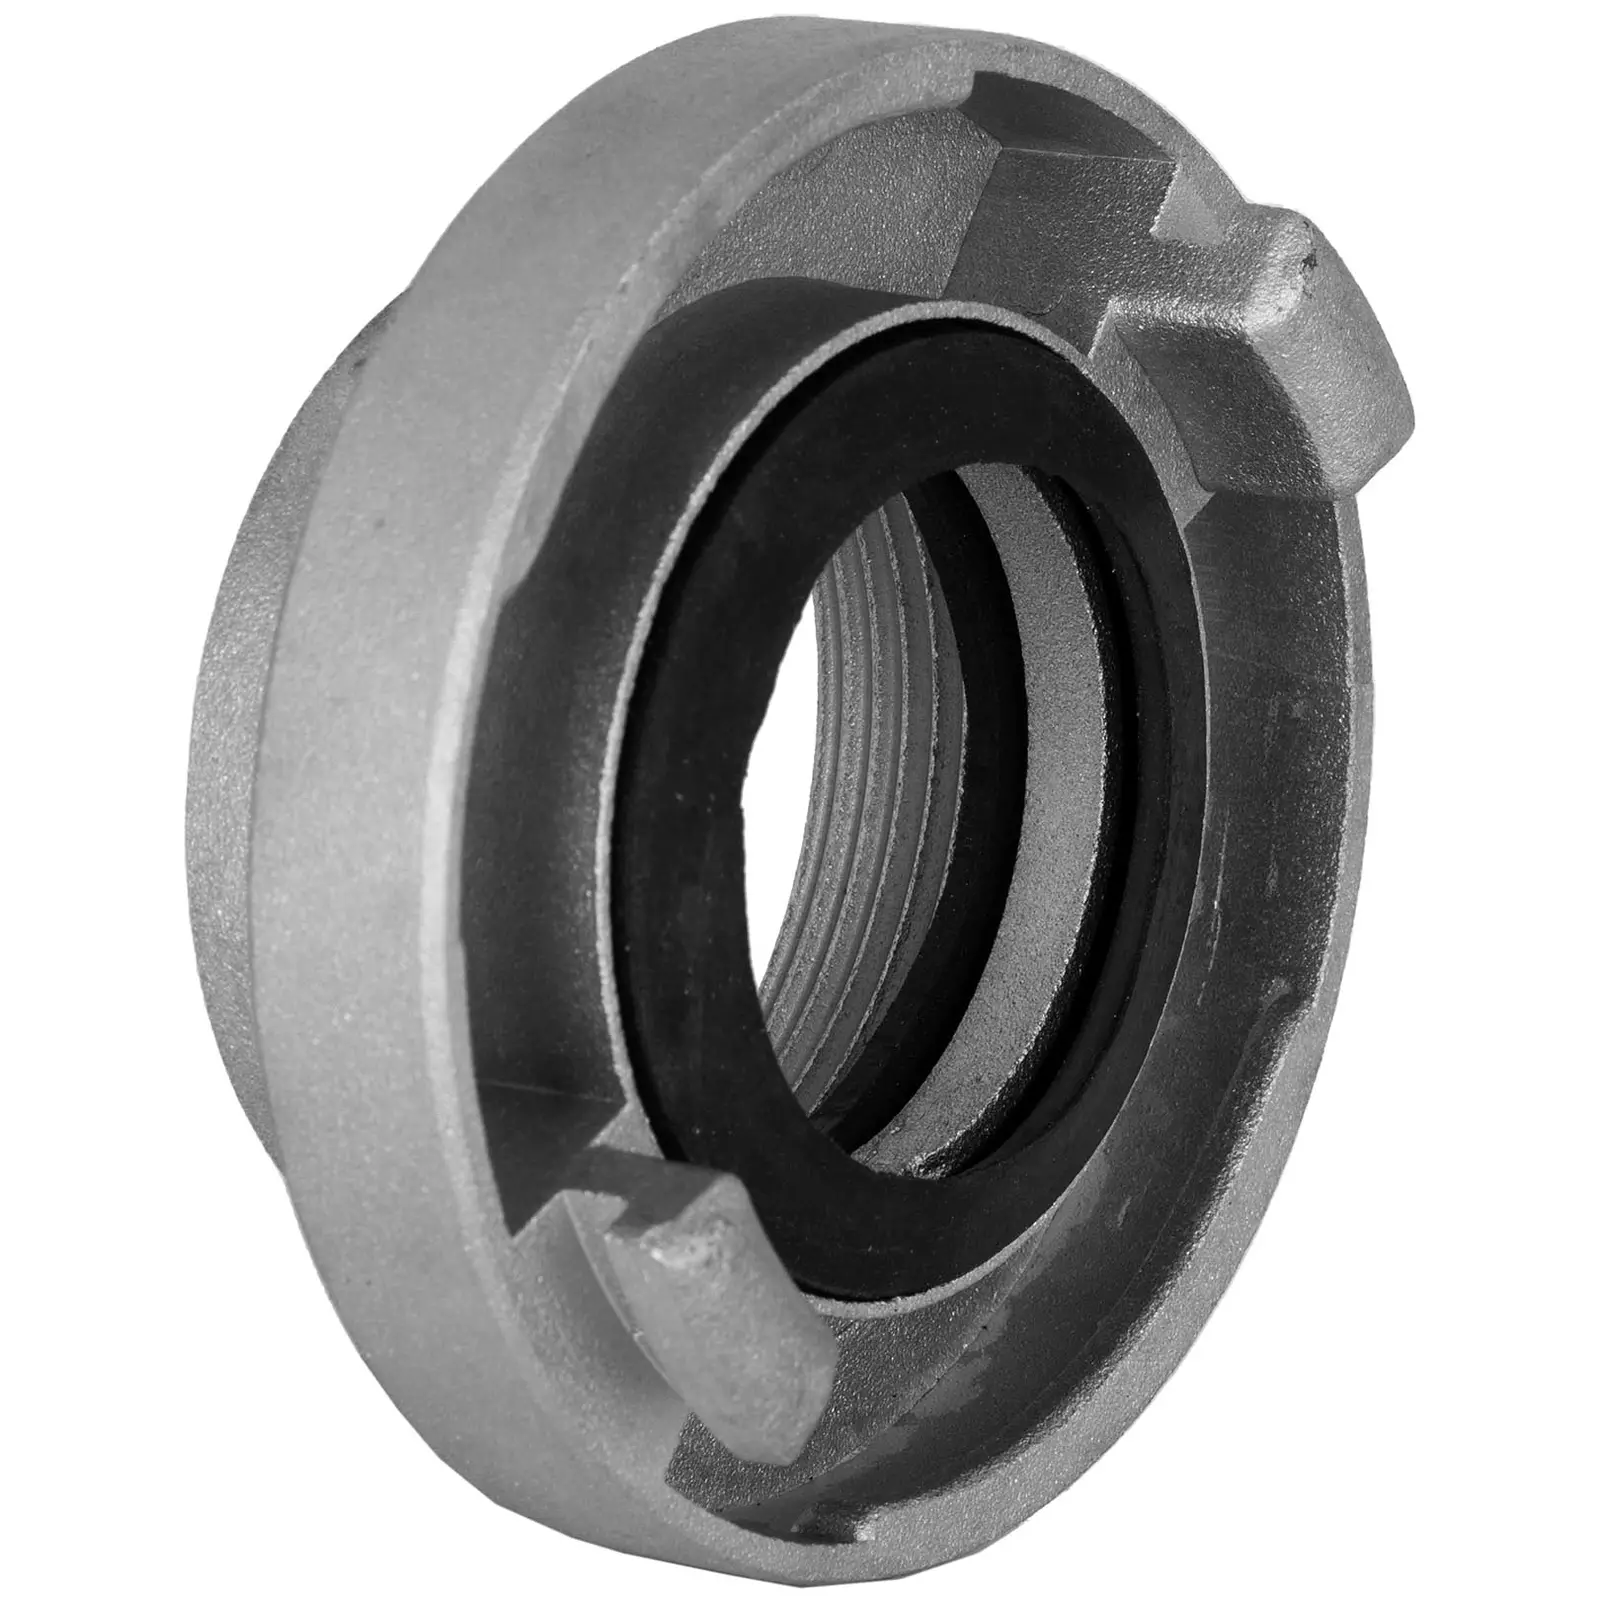 Fixed coupling with internal thread - hose size 2 "- Storz